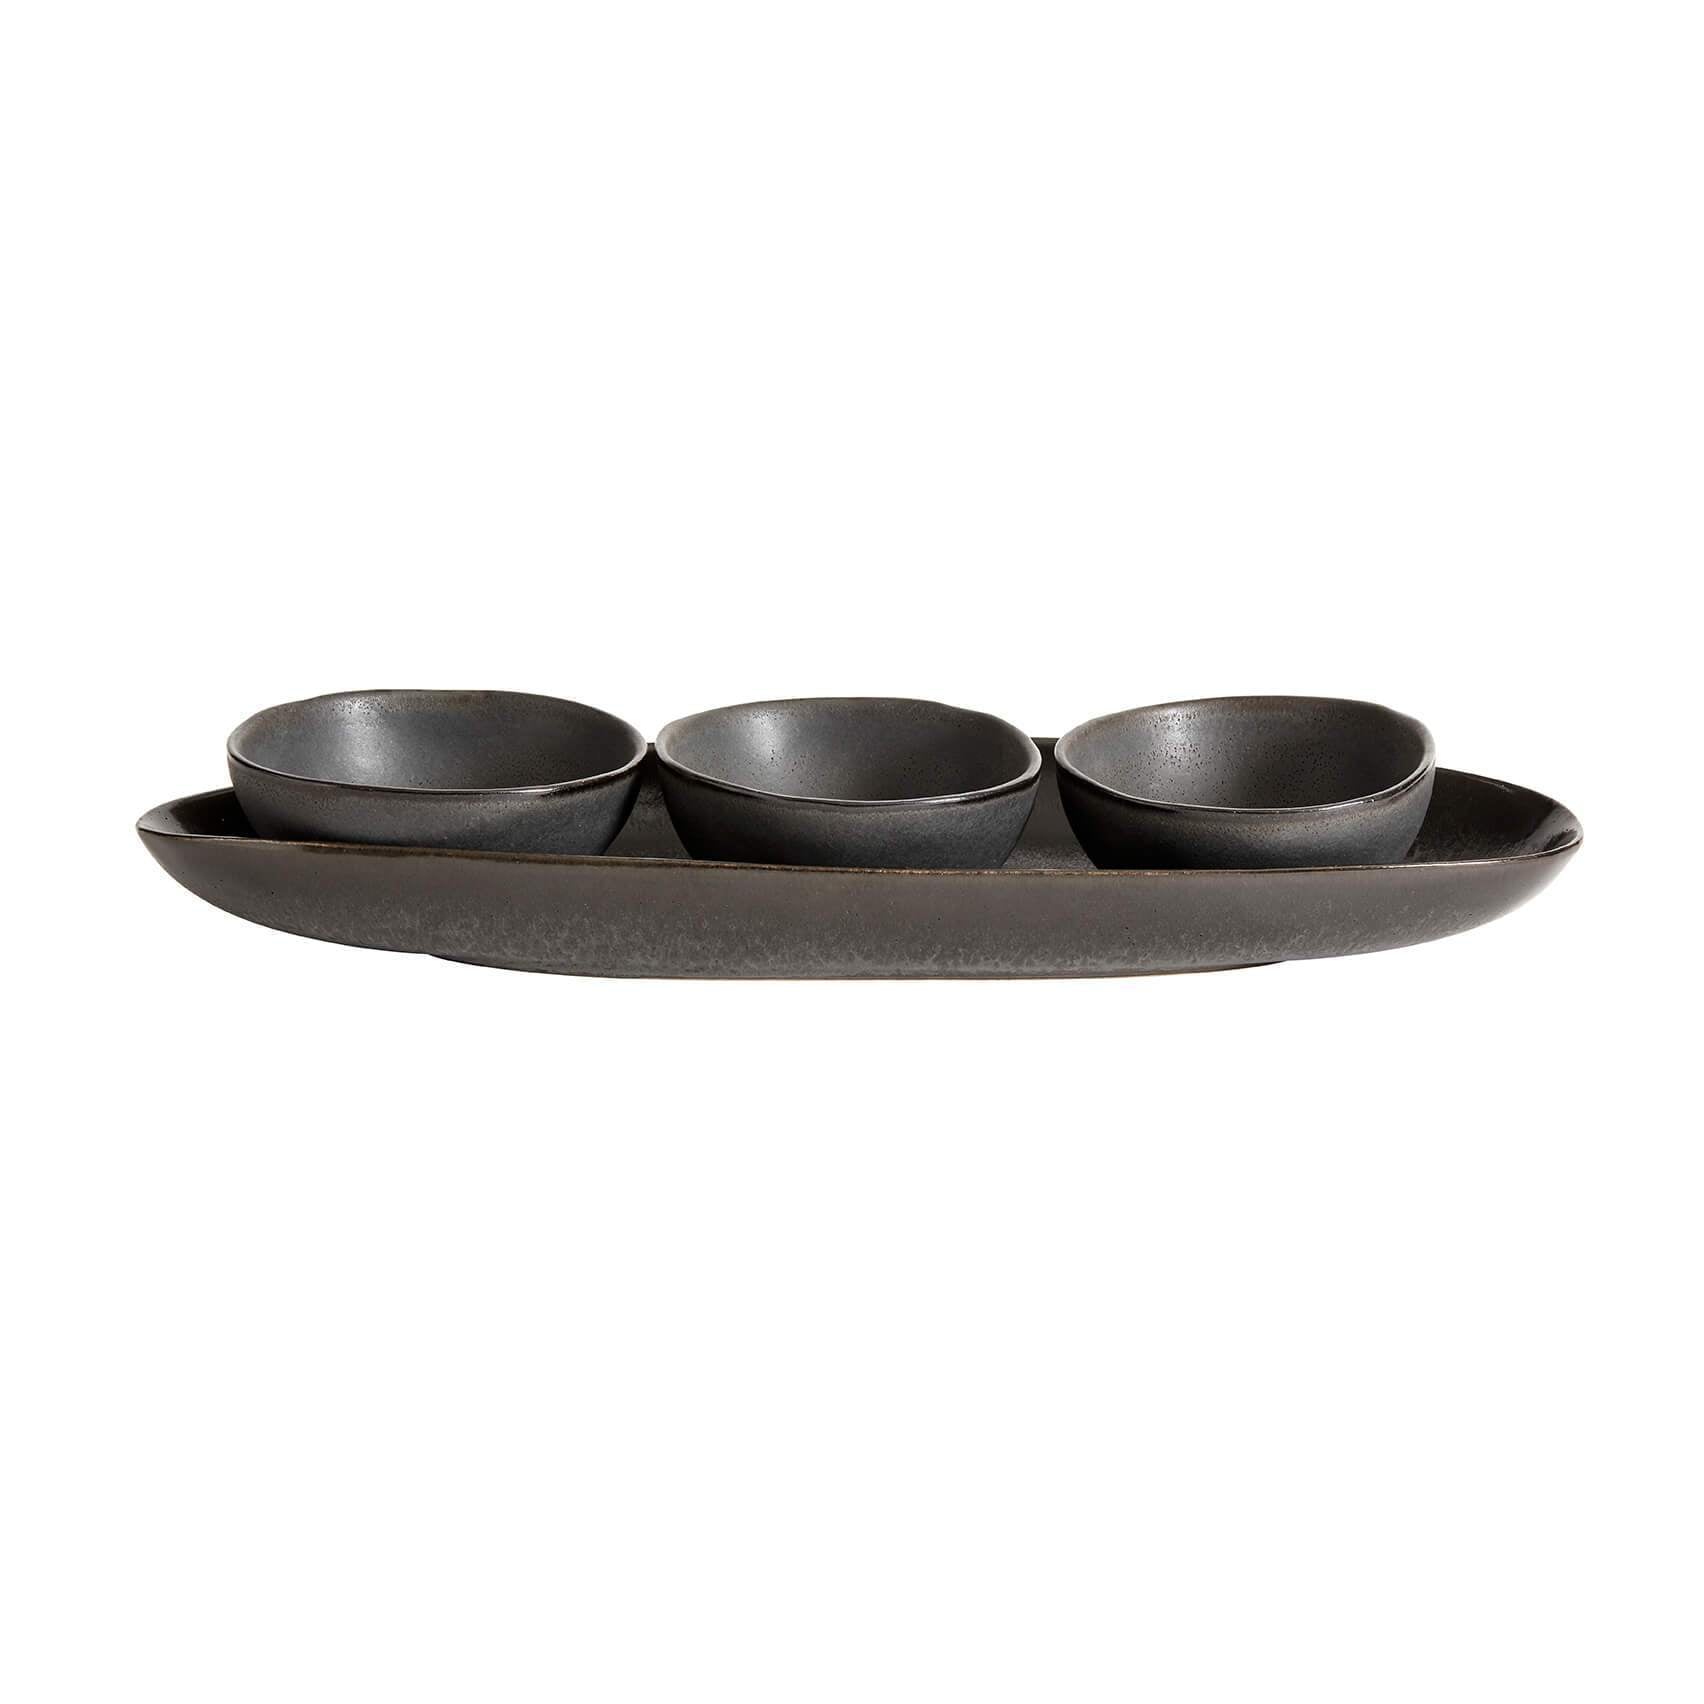 Muubs Mame Service Assiette Coffee ovale, 36,5cm